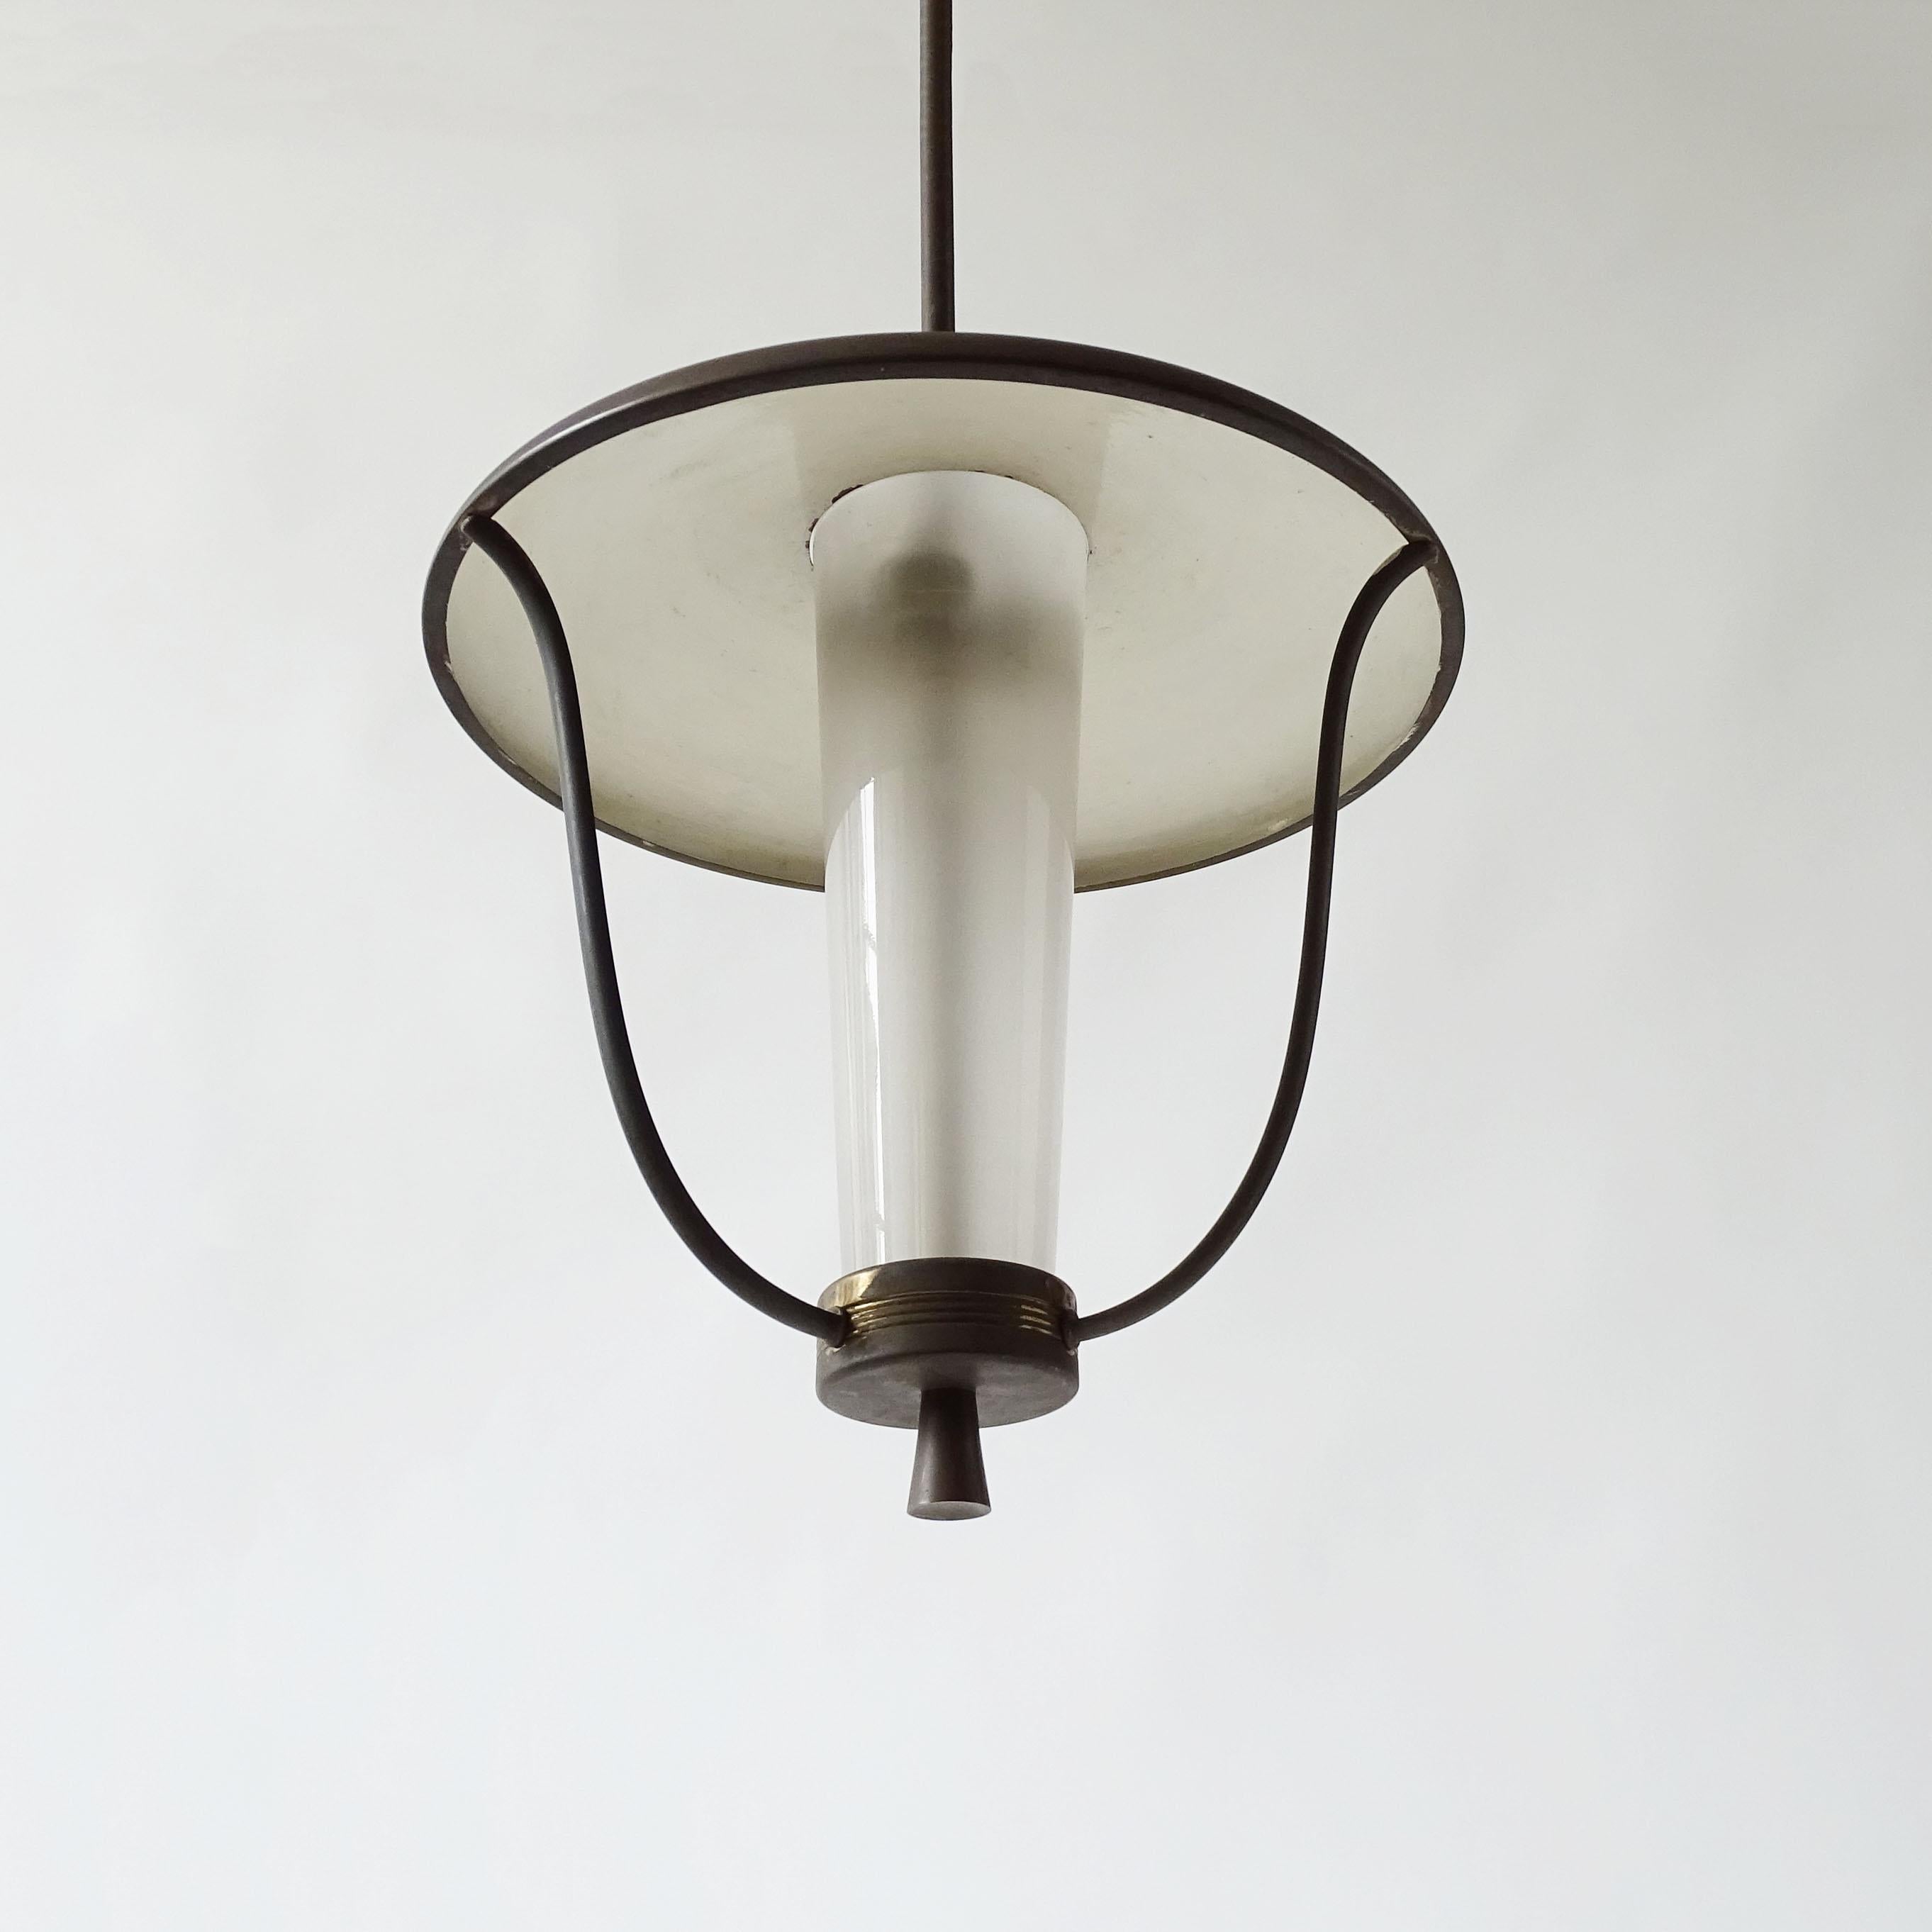 Monumental Guglielmo Ulrich Ceiling Lamp in Brass and Glass, Italy 1940s For Sale 2